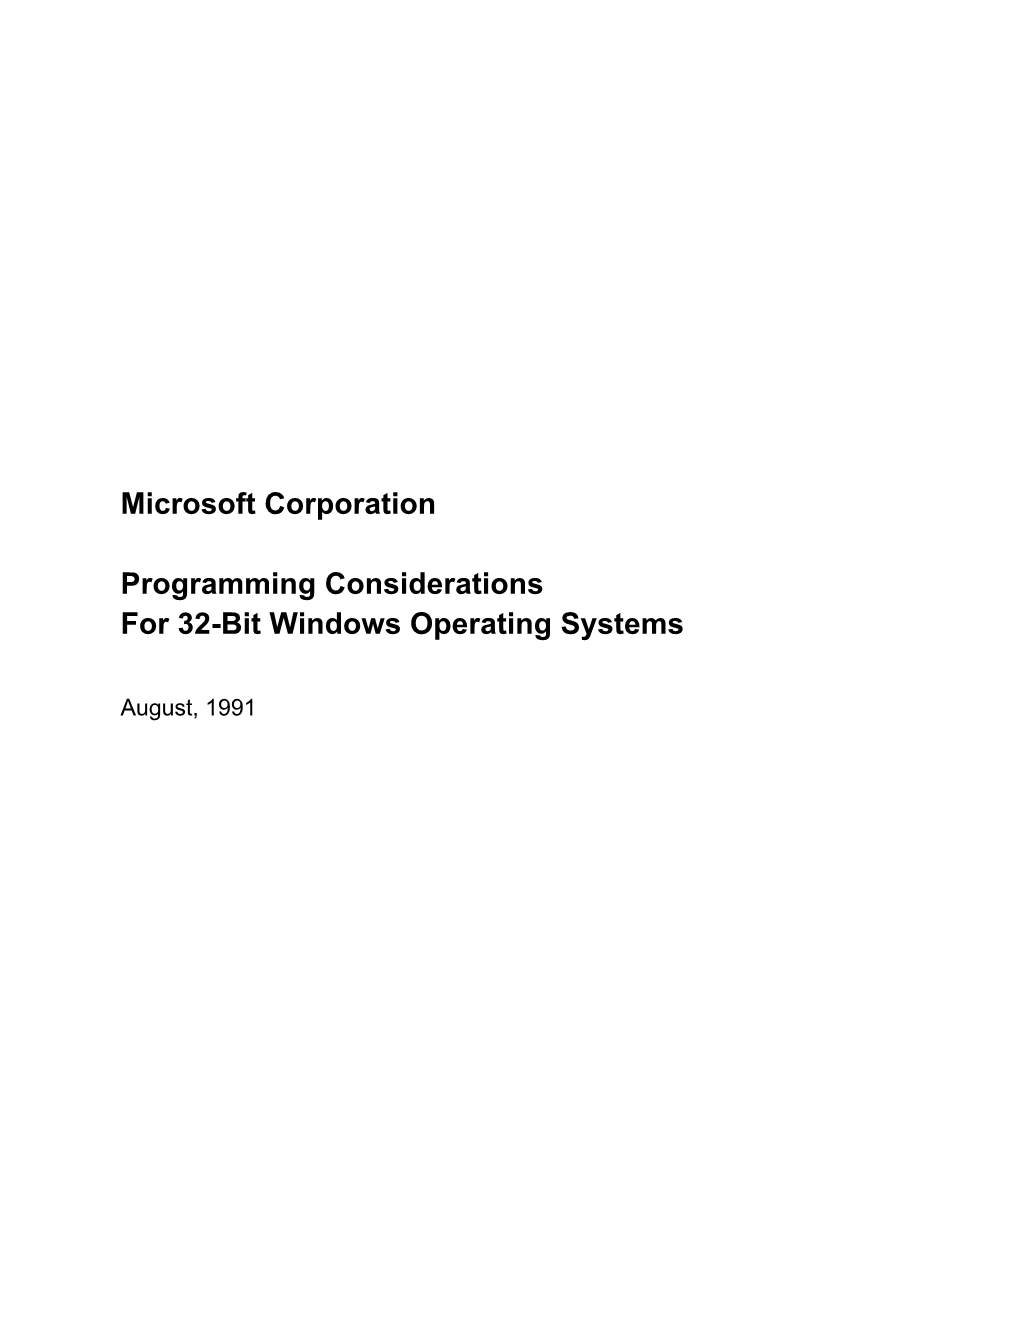 Programming Considerations for 32-Bit Windows Operating Systems